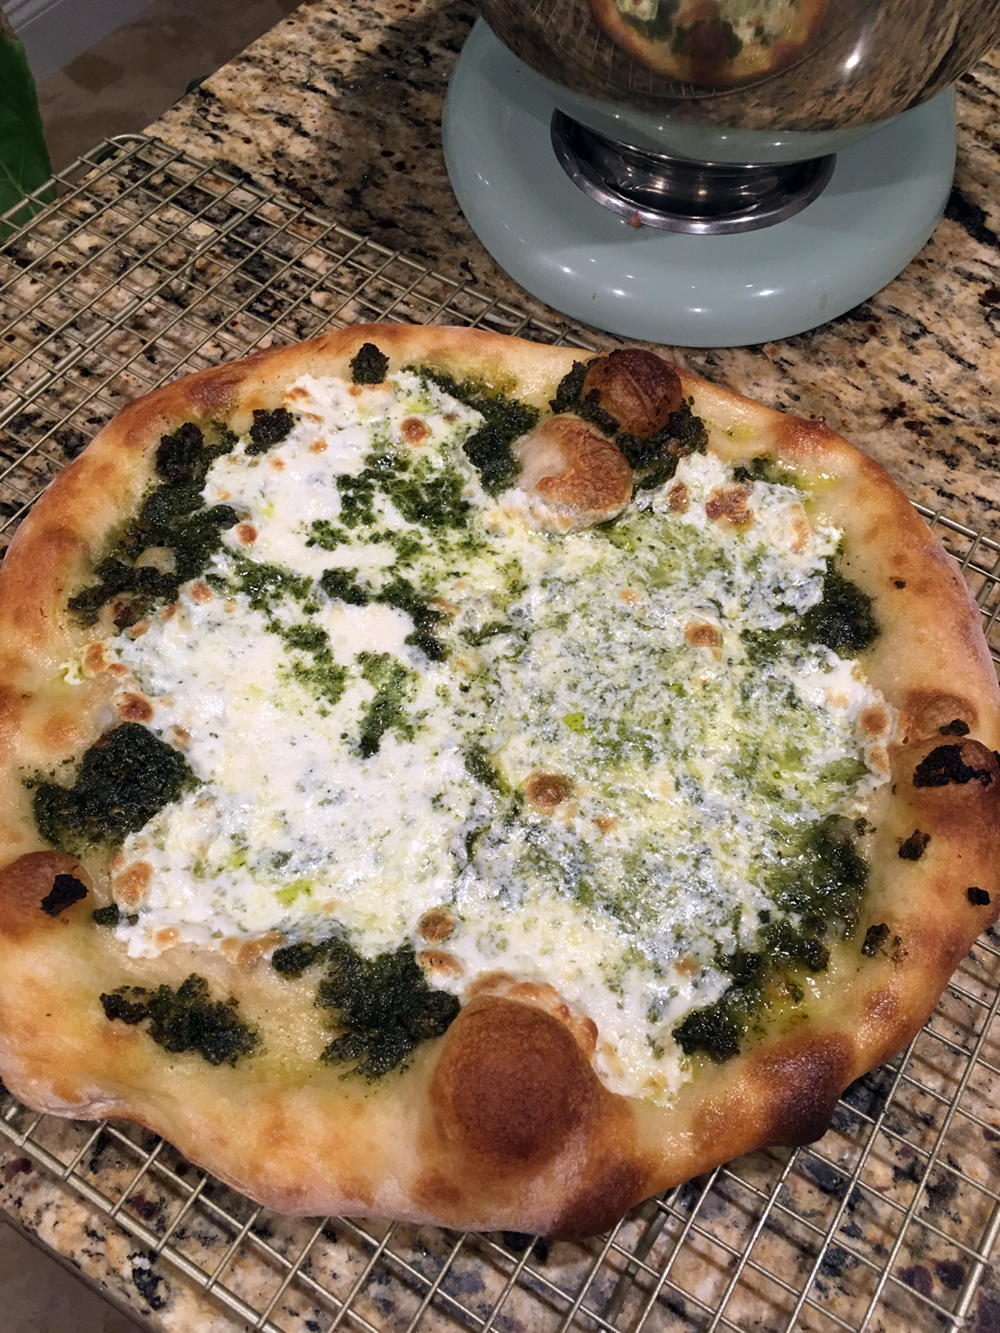 Carrot top and fennel pesto pizza